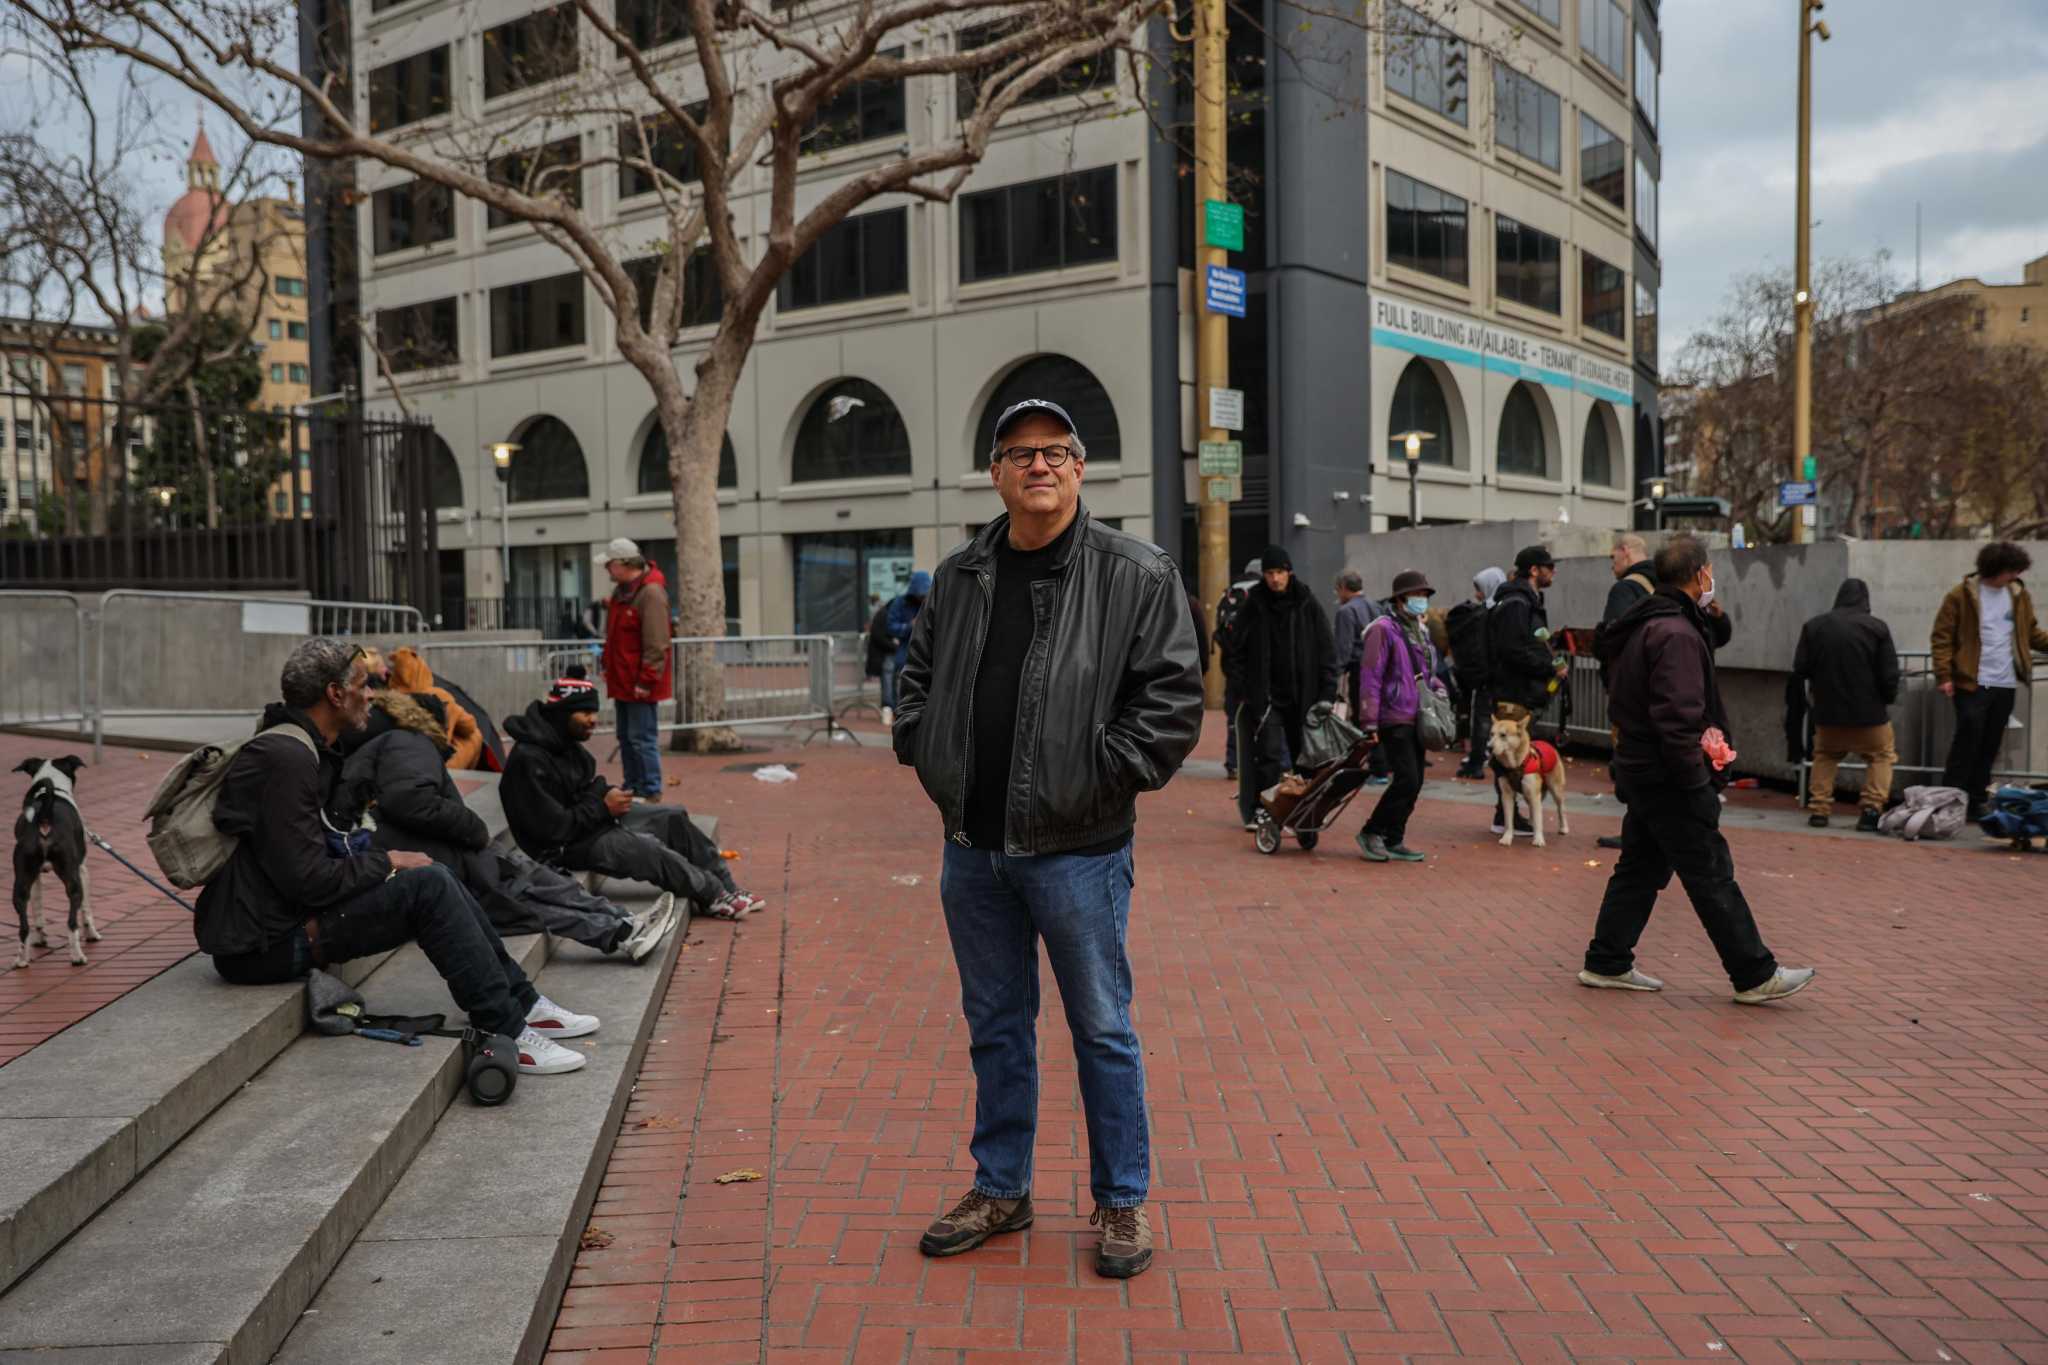 Expert on U.S. drug abuse says conditions in S.F.’s Tenderloin are tragically familiar